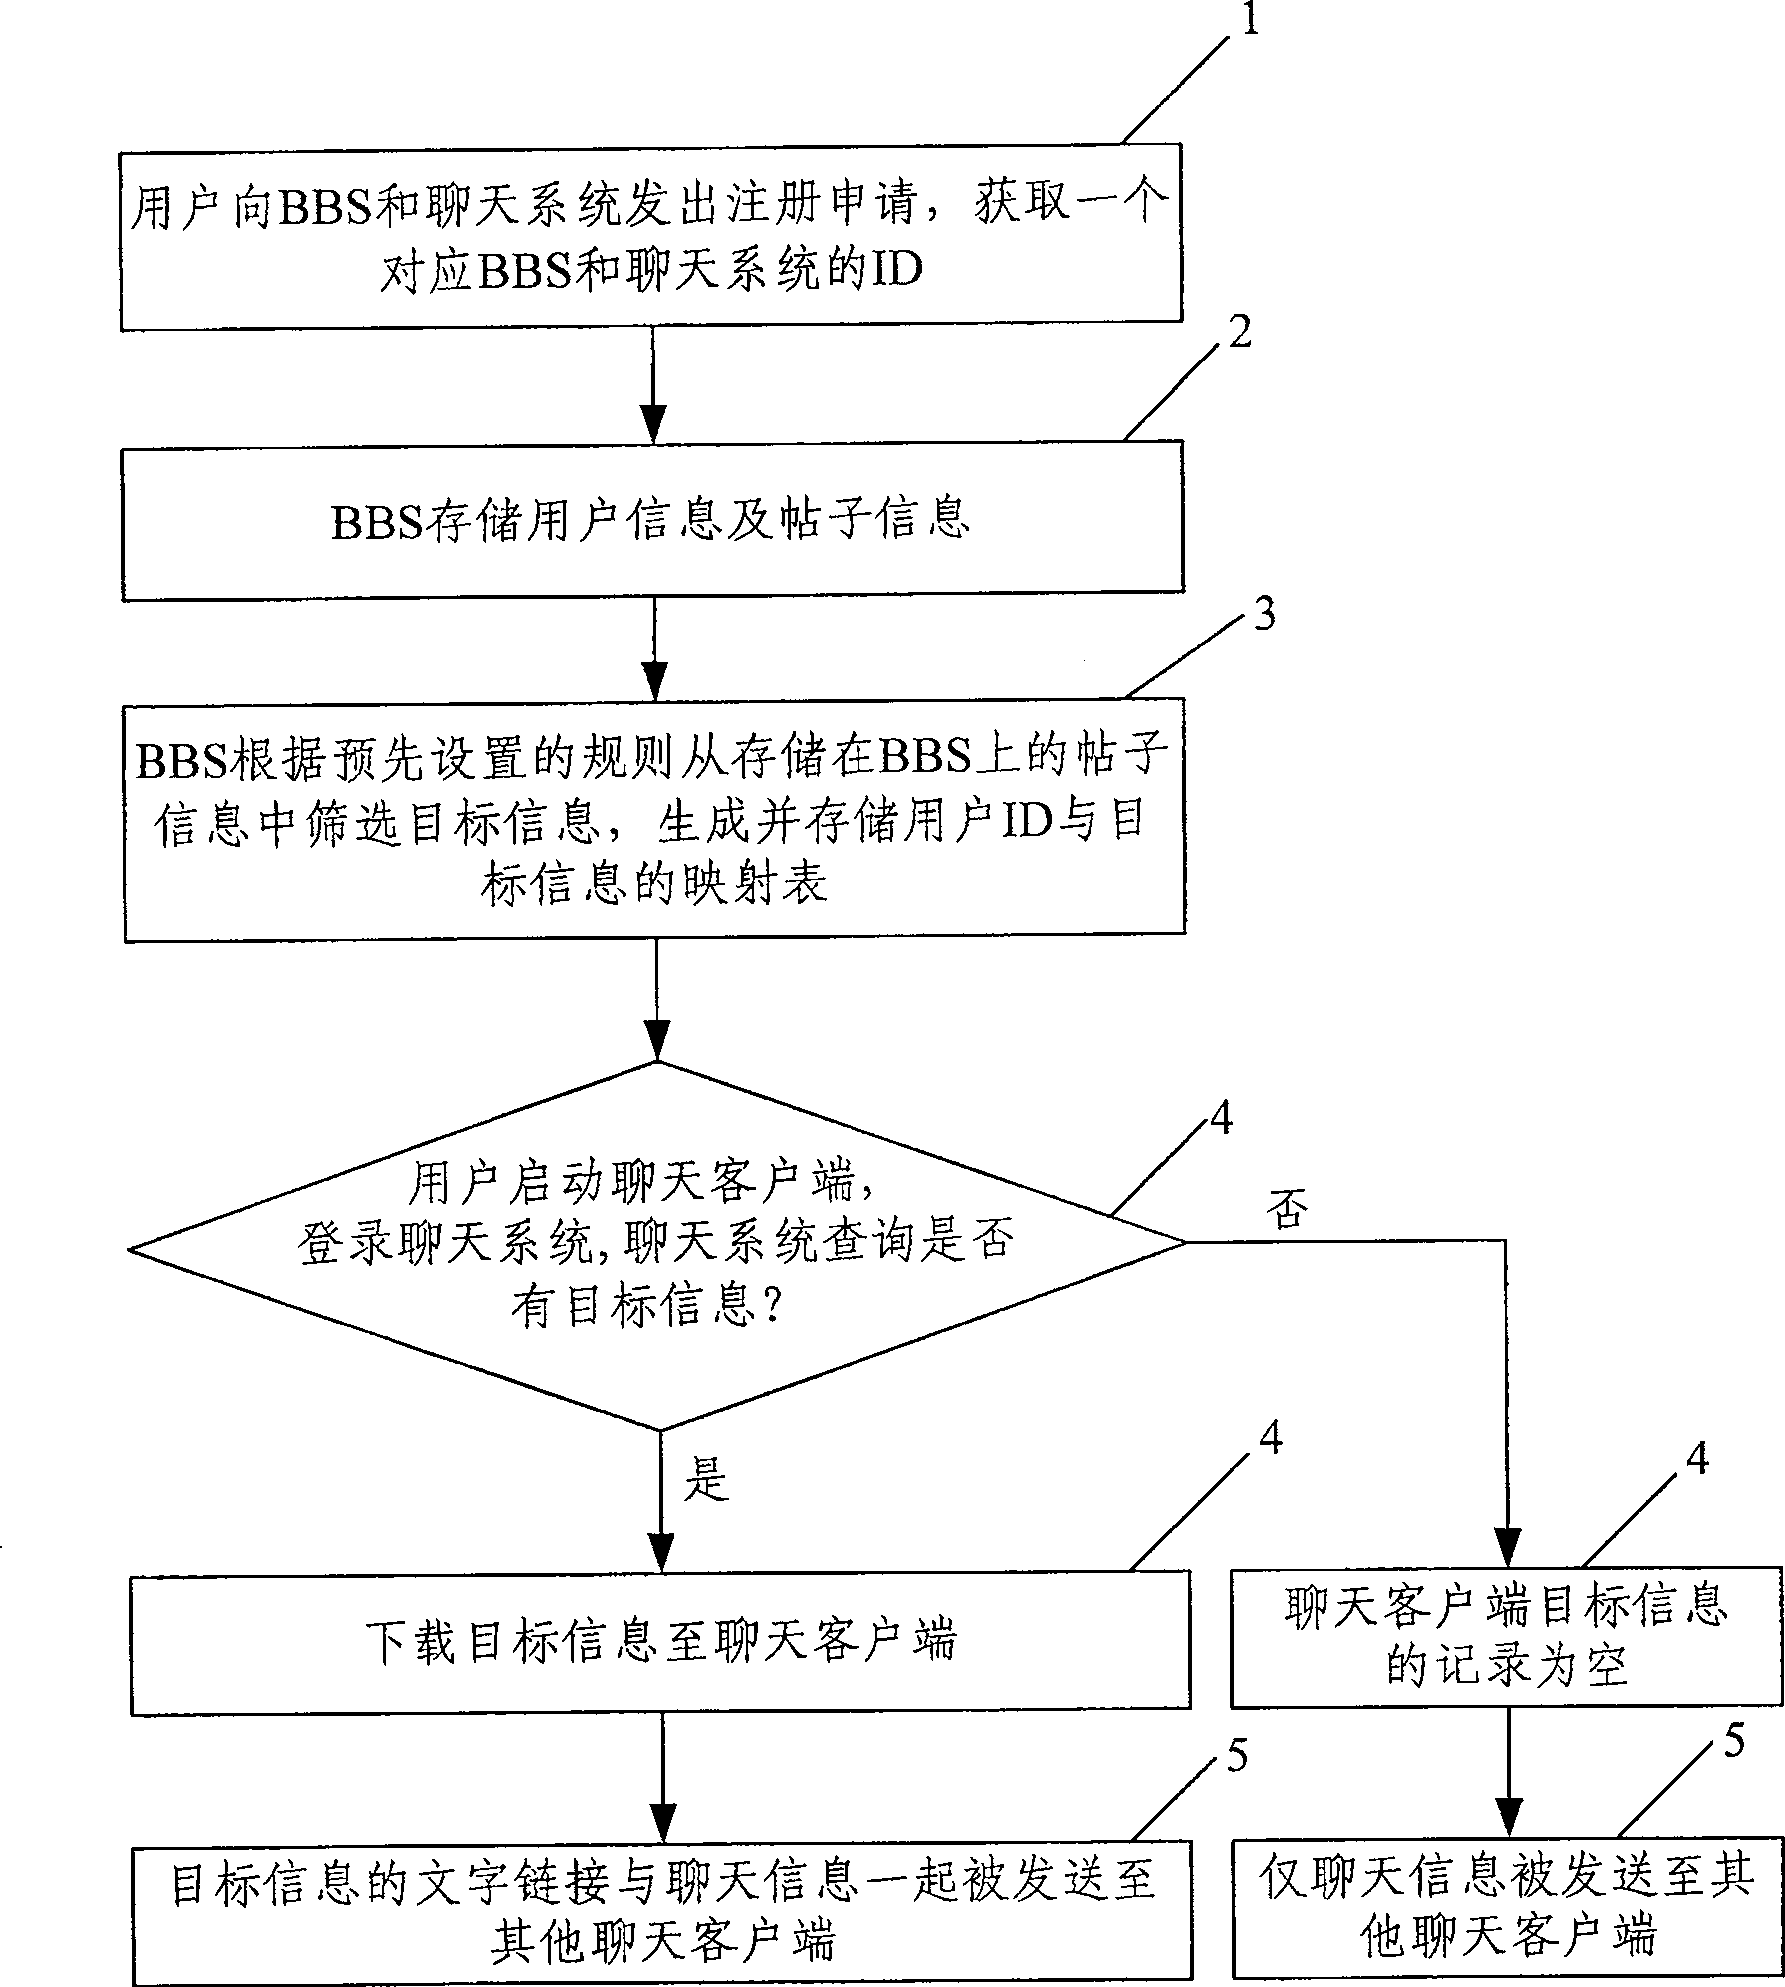 Method and system for information real-time intelligent association between chat system and bulletin board system